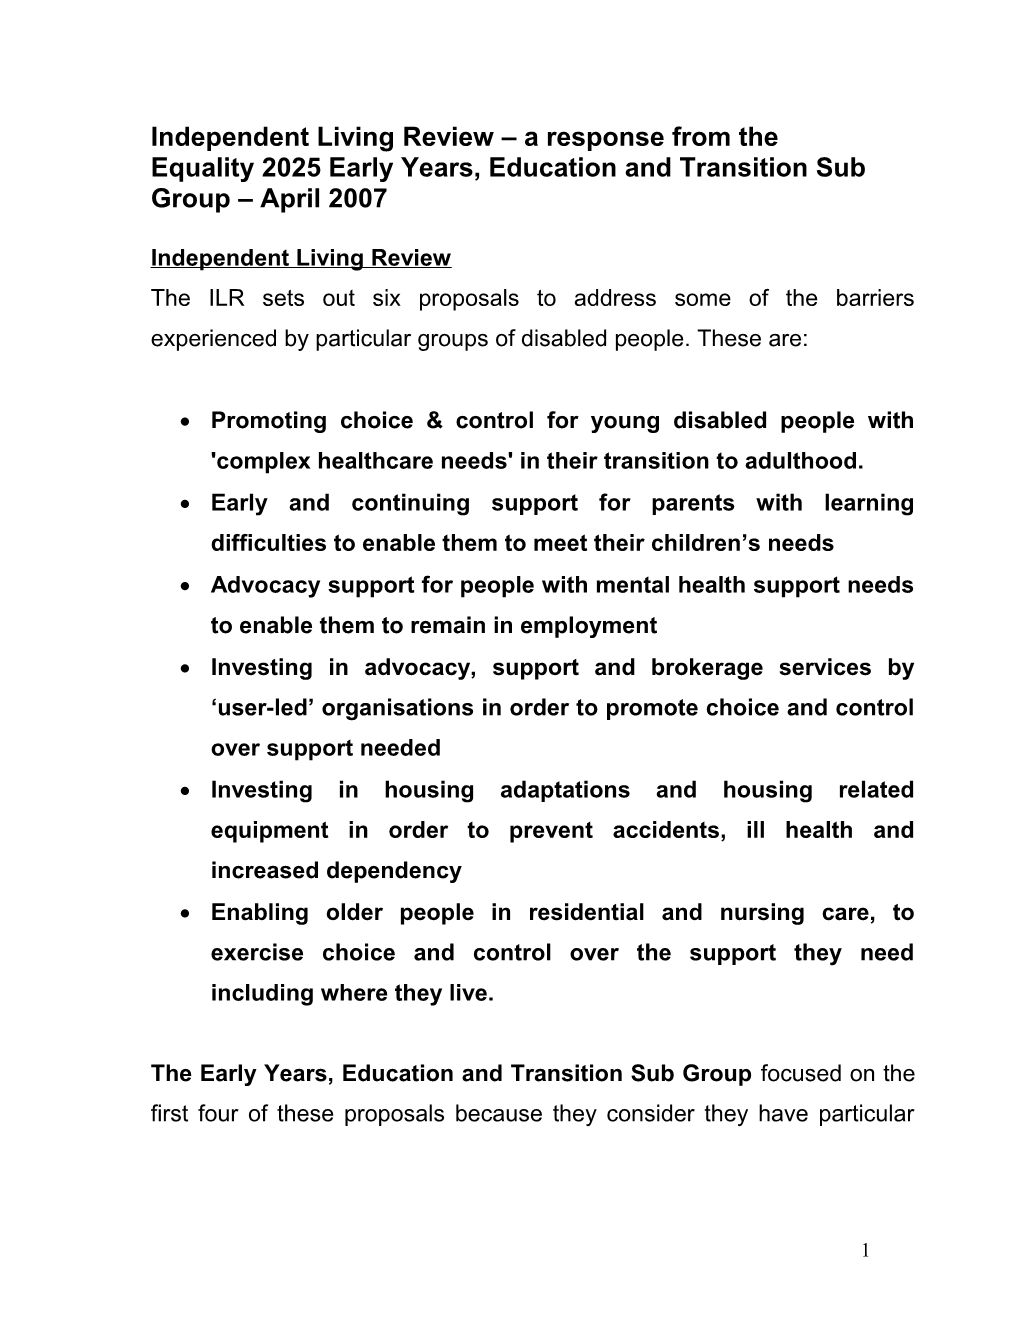 Independent Living Review a Response from the Equality 2025 Early Years, Education And